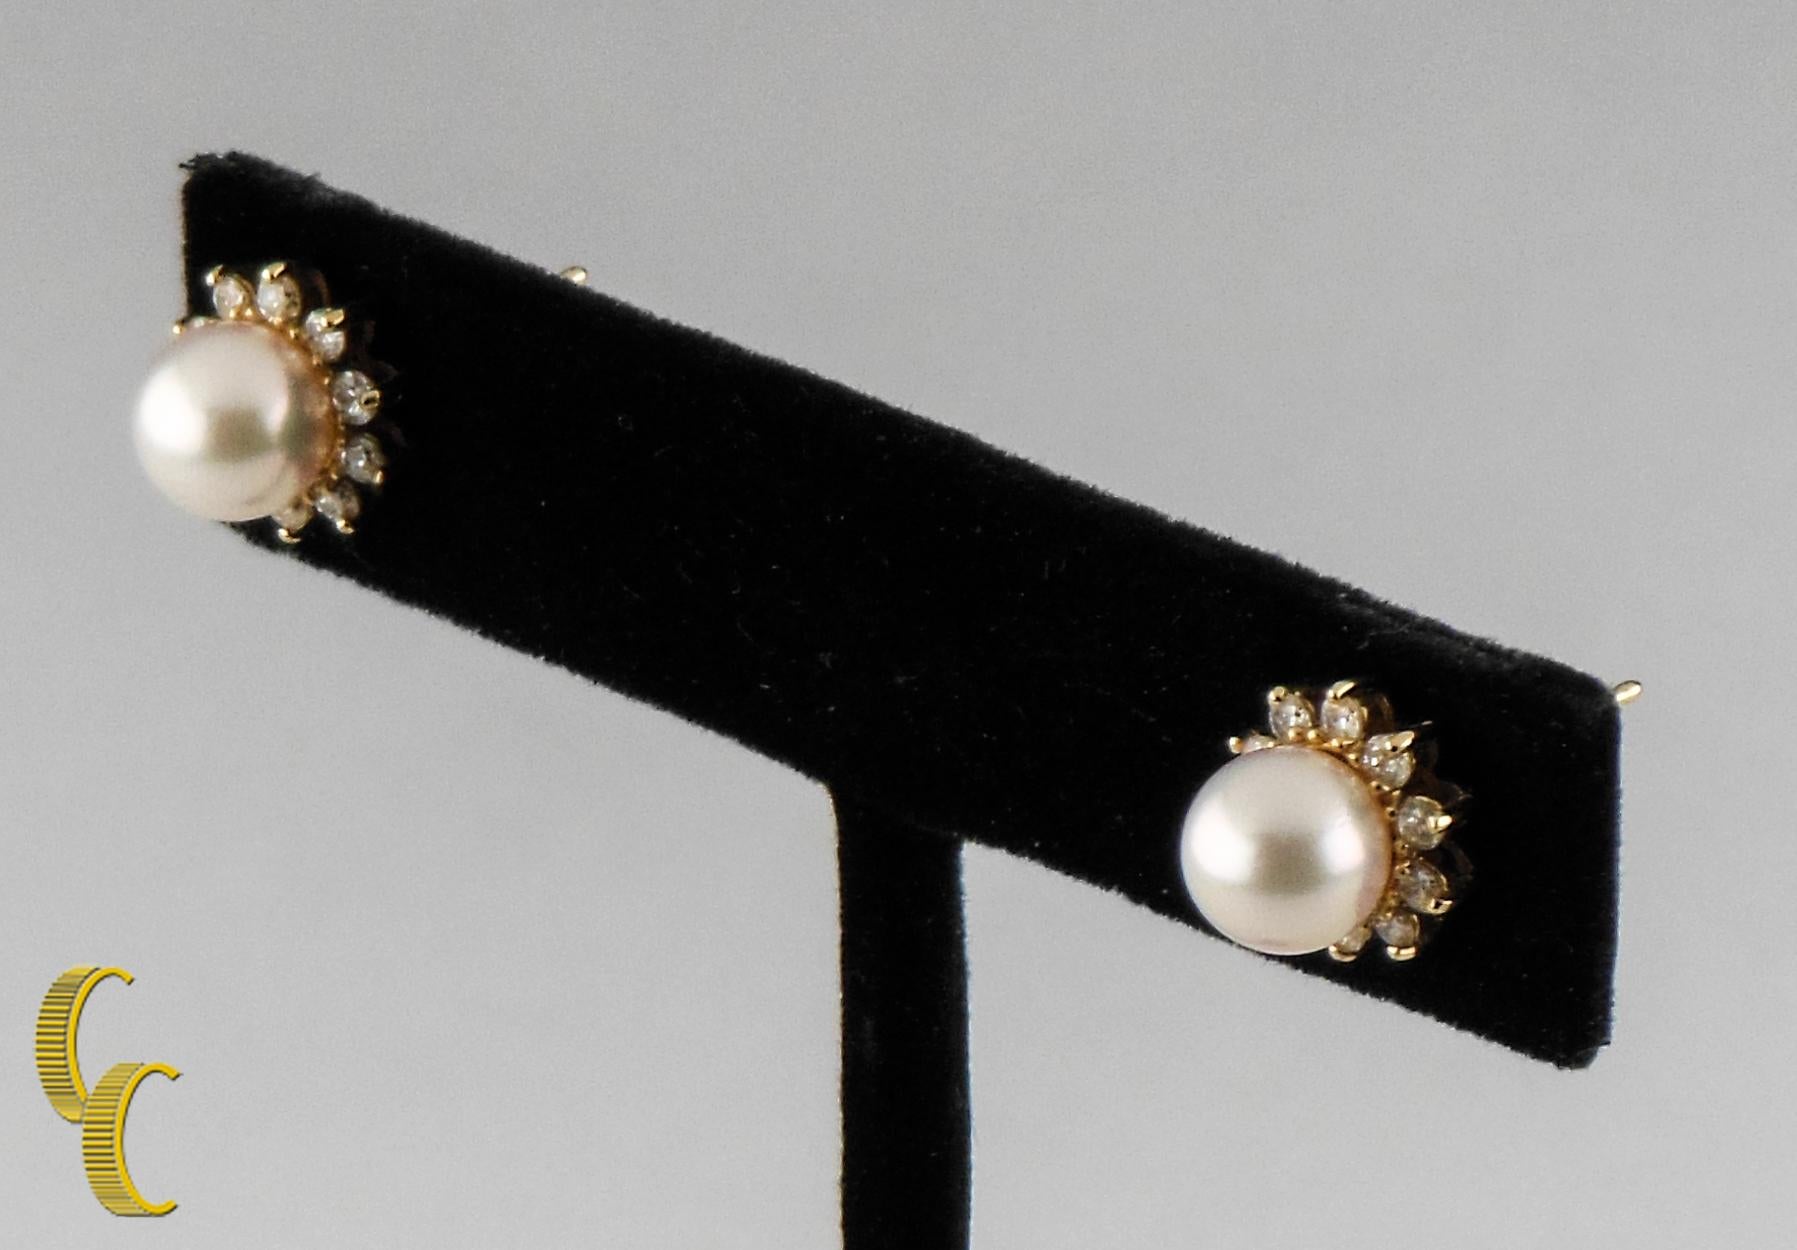 Modern 0.50 Carat Diamond and Pearl Solitaire Earrings in Yellow Gold